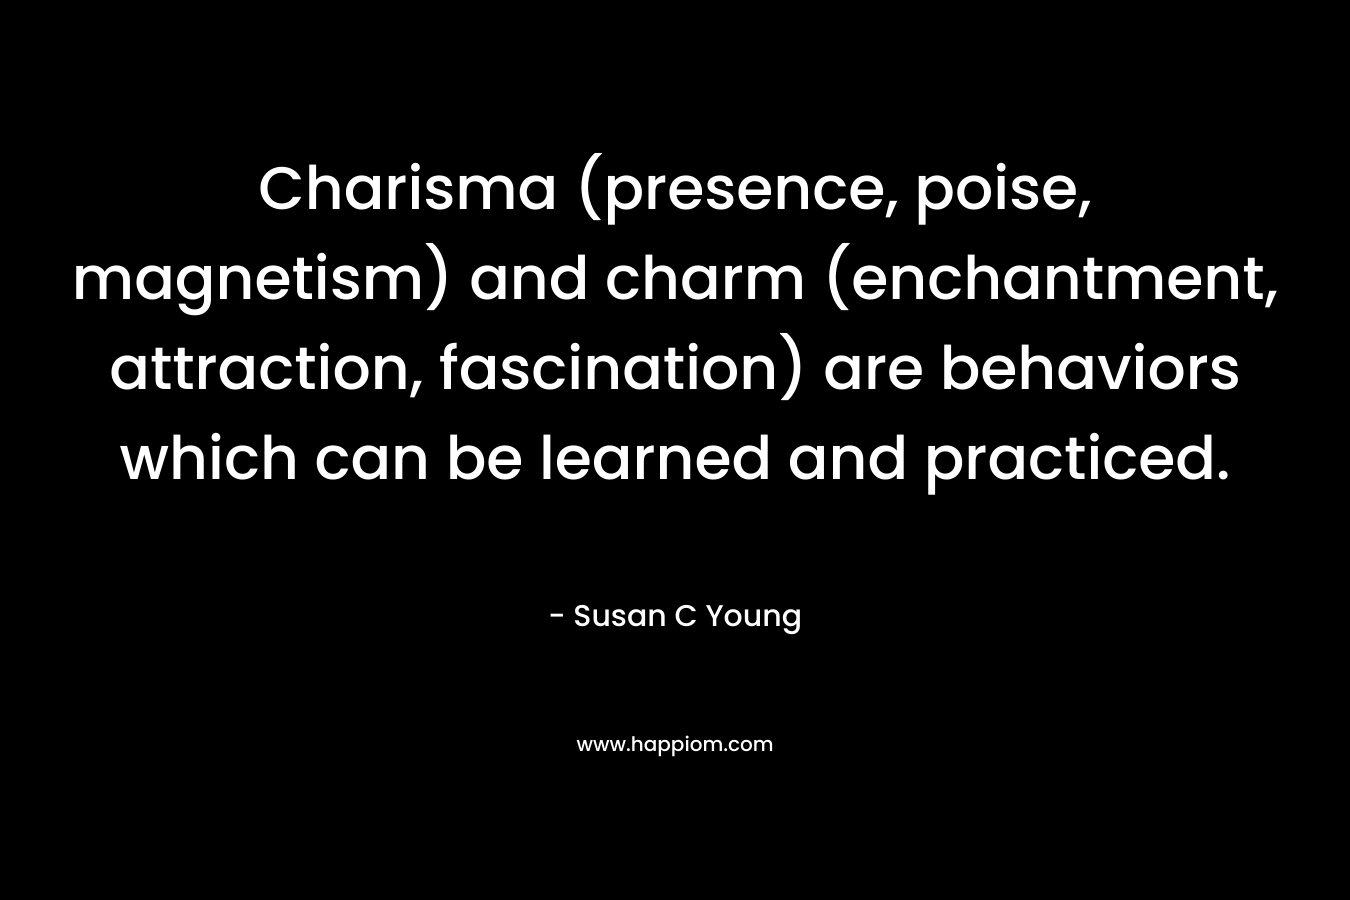 Charisma (presence, poise, magnetism) and charm (enchantment, attraction, fascination) are behaviors which can be learned and practiced. – Susan C Young